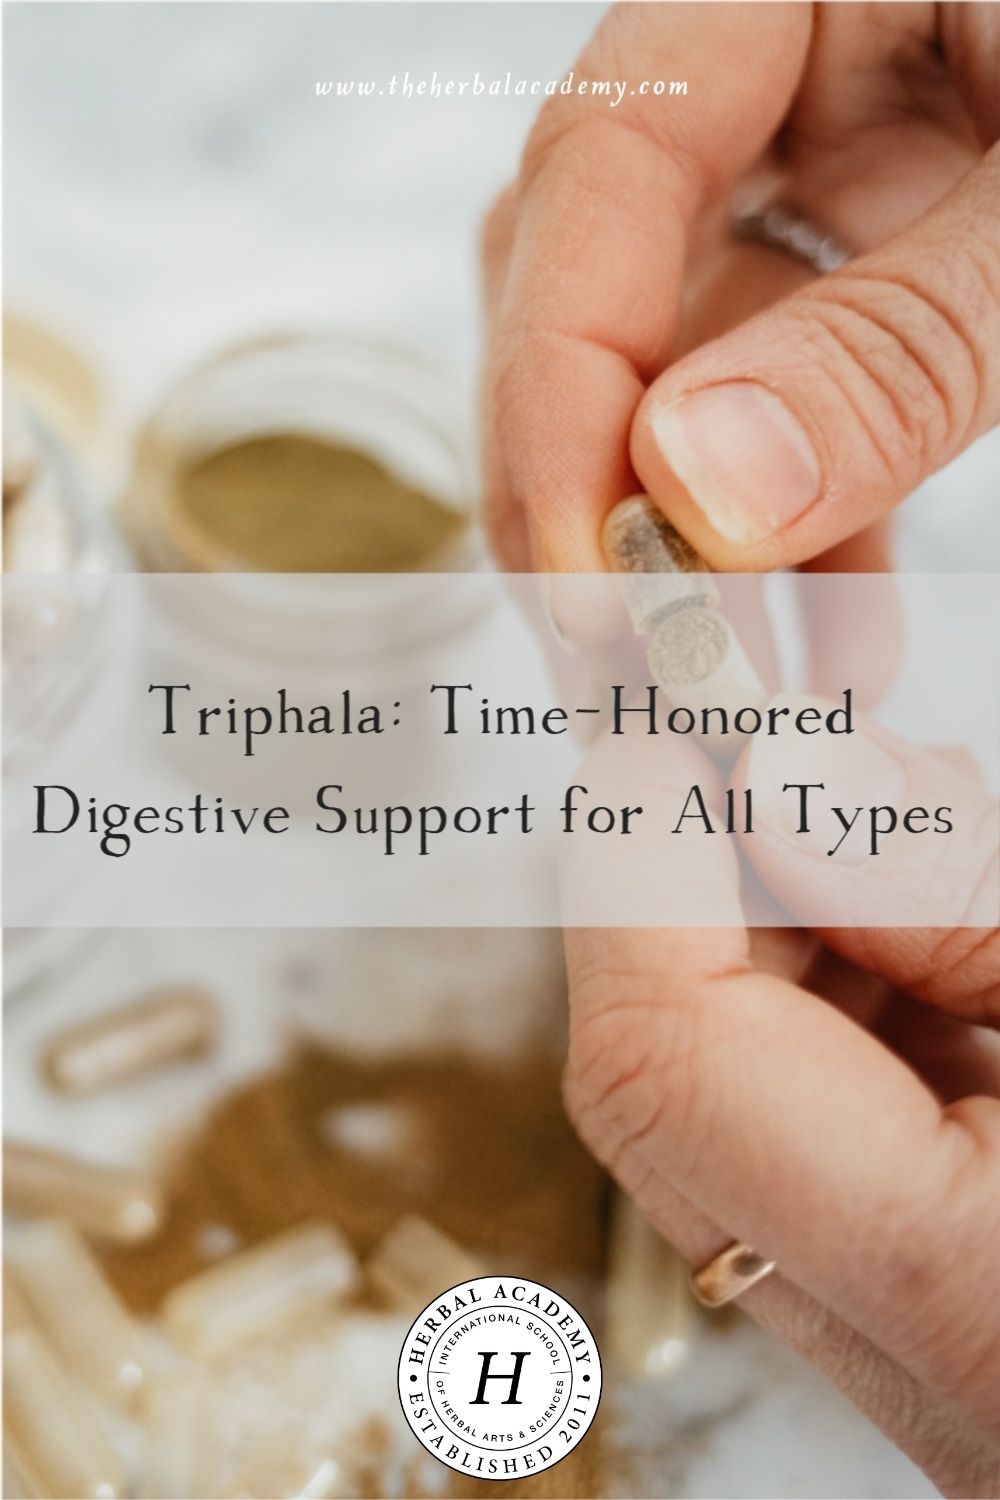 Triphala: Time-Honored Digestive Support for All Types | Herbal Academy | Triphala, meaning “three fruits,” is a combination of three herbs and a wonderful ally for vata, pitta, and kapha types alike.